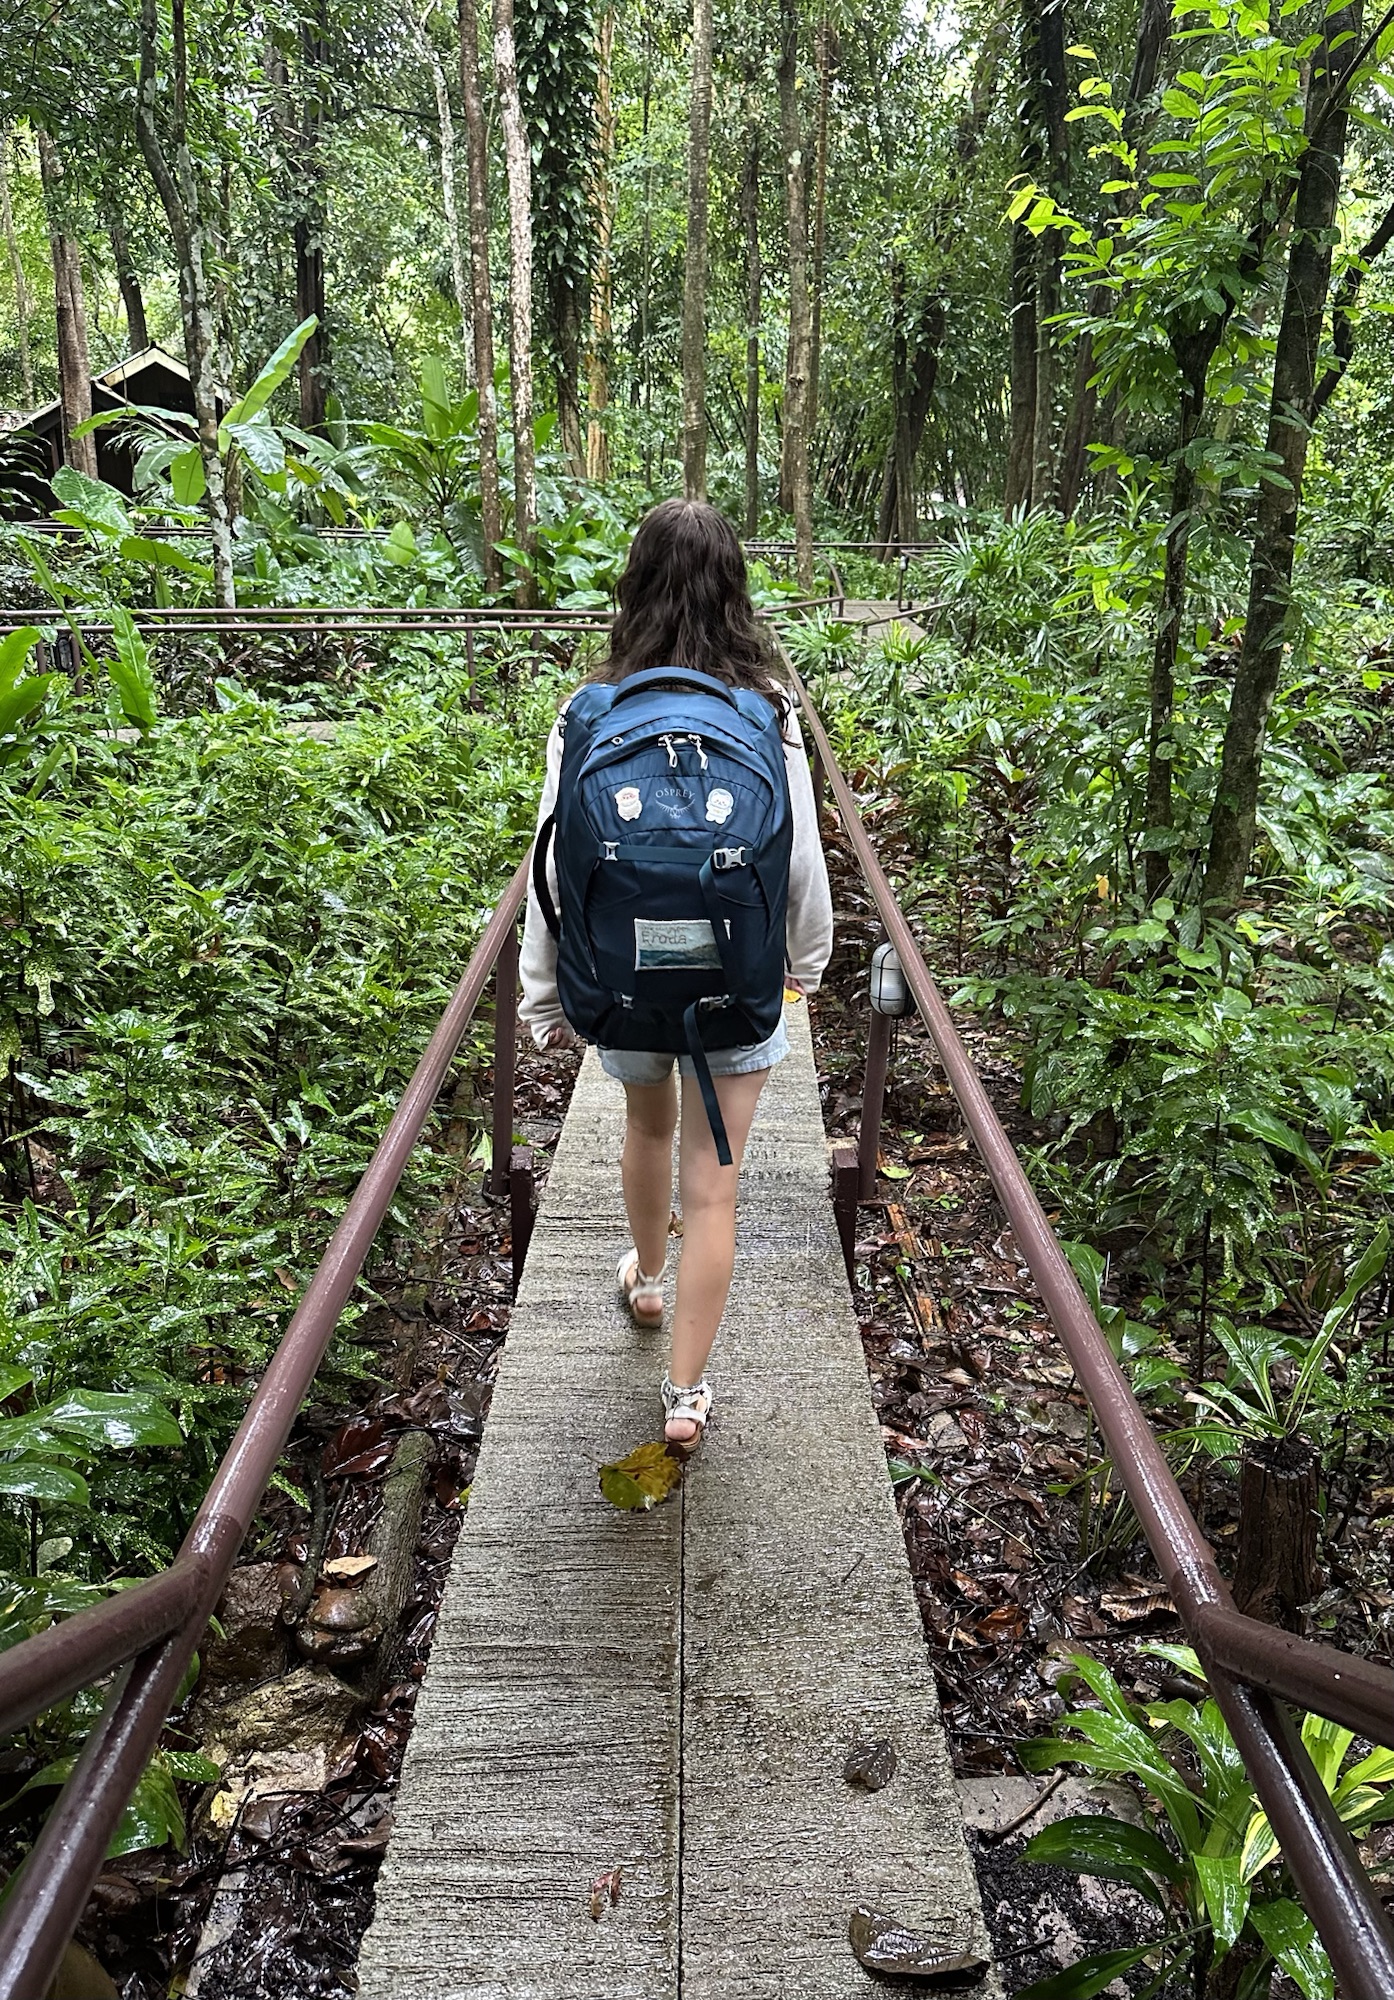 Chloe walking through the jungle with Osprey Fairview 40L backpack on.